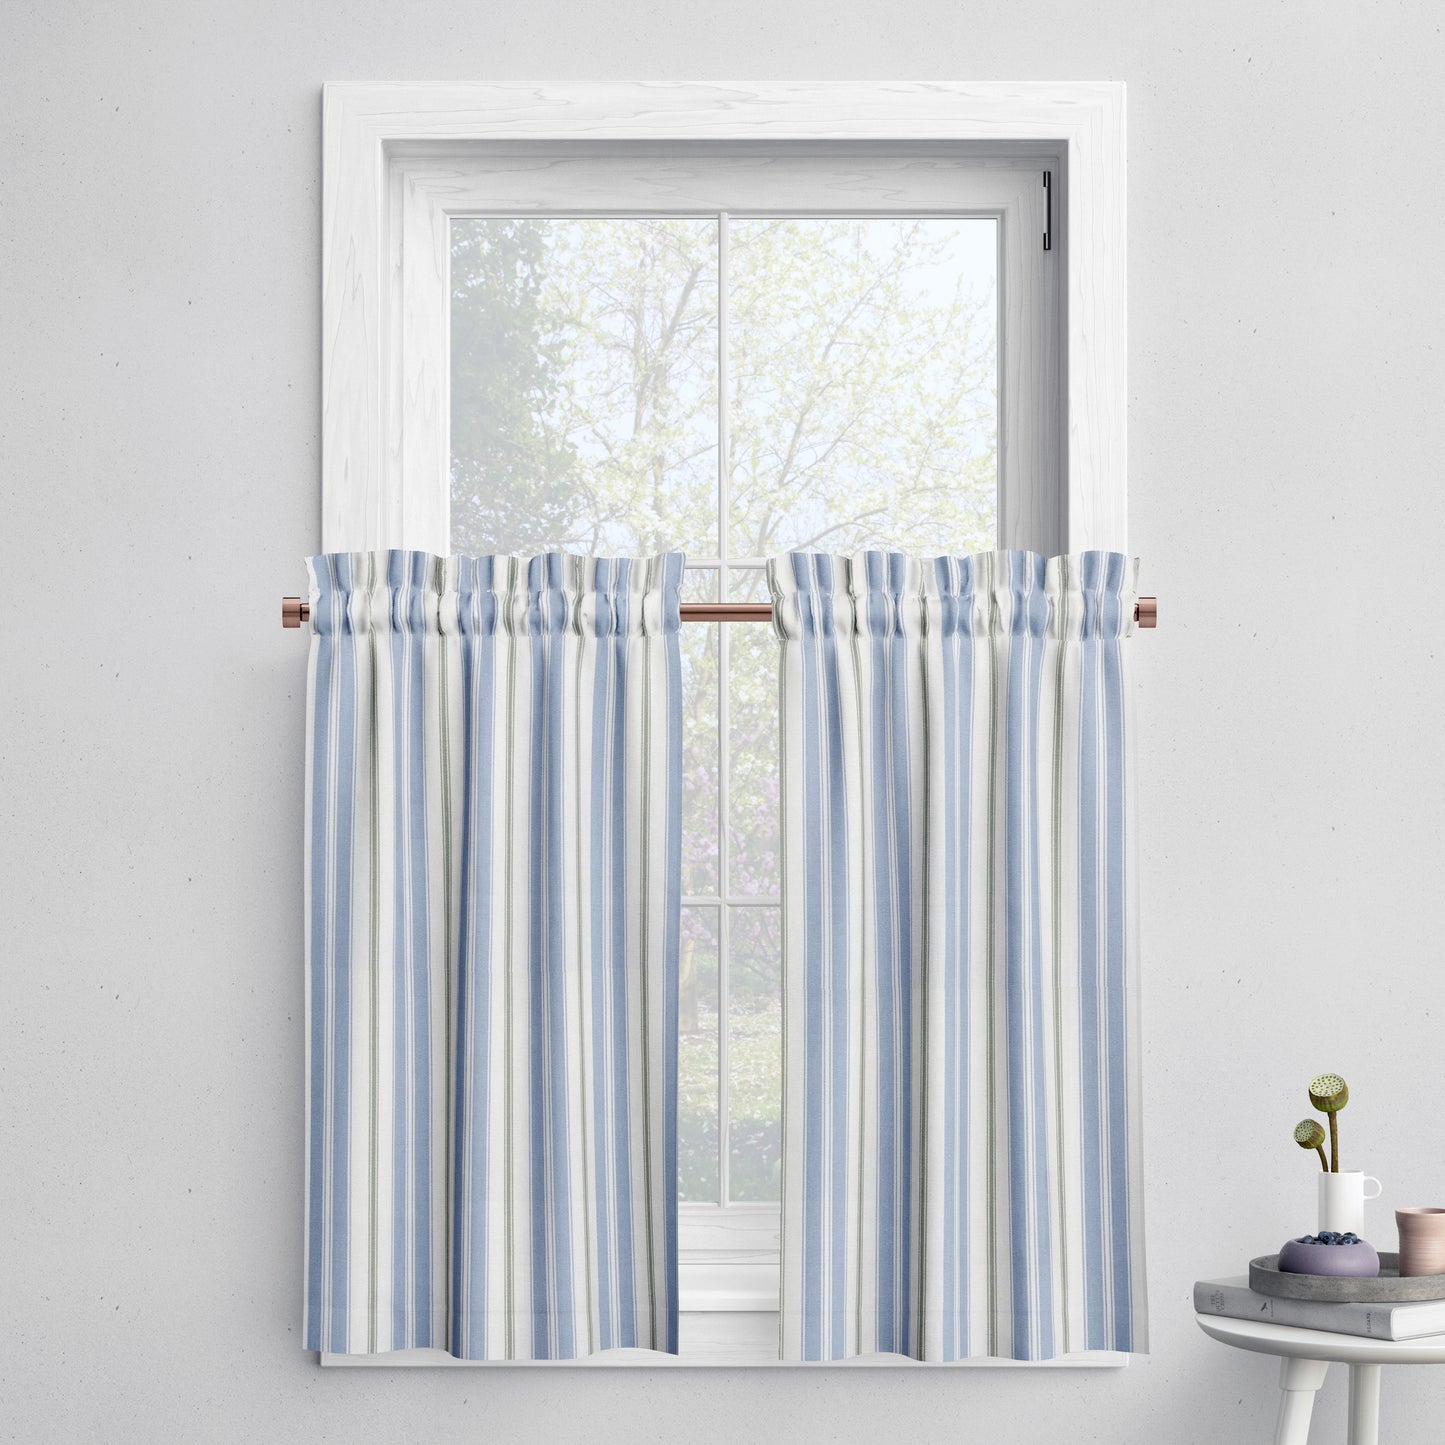 Tailored Tier Cafe Curtain Panels Pair in Newbury Antique Blue Stripe- Blue, Green, White